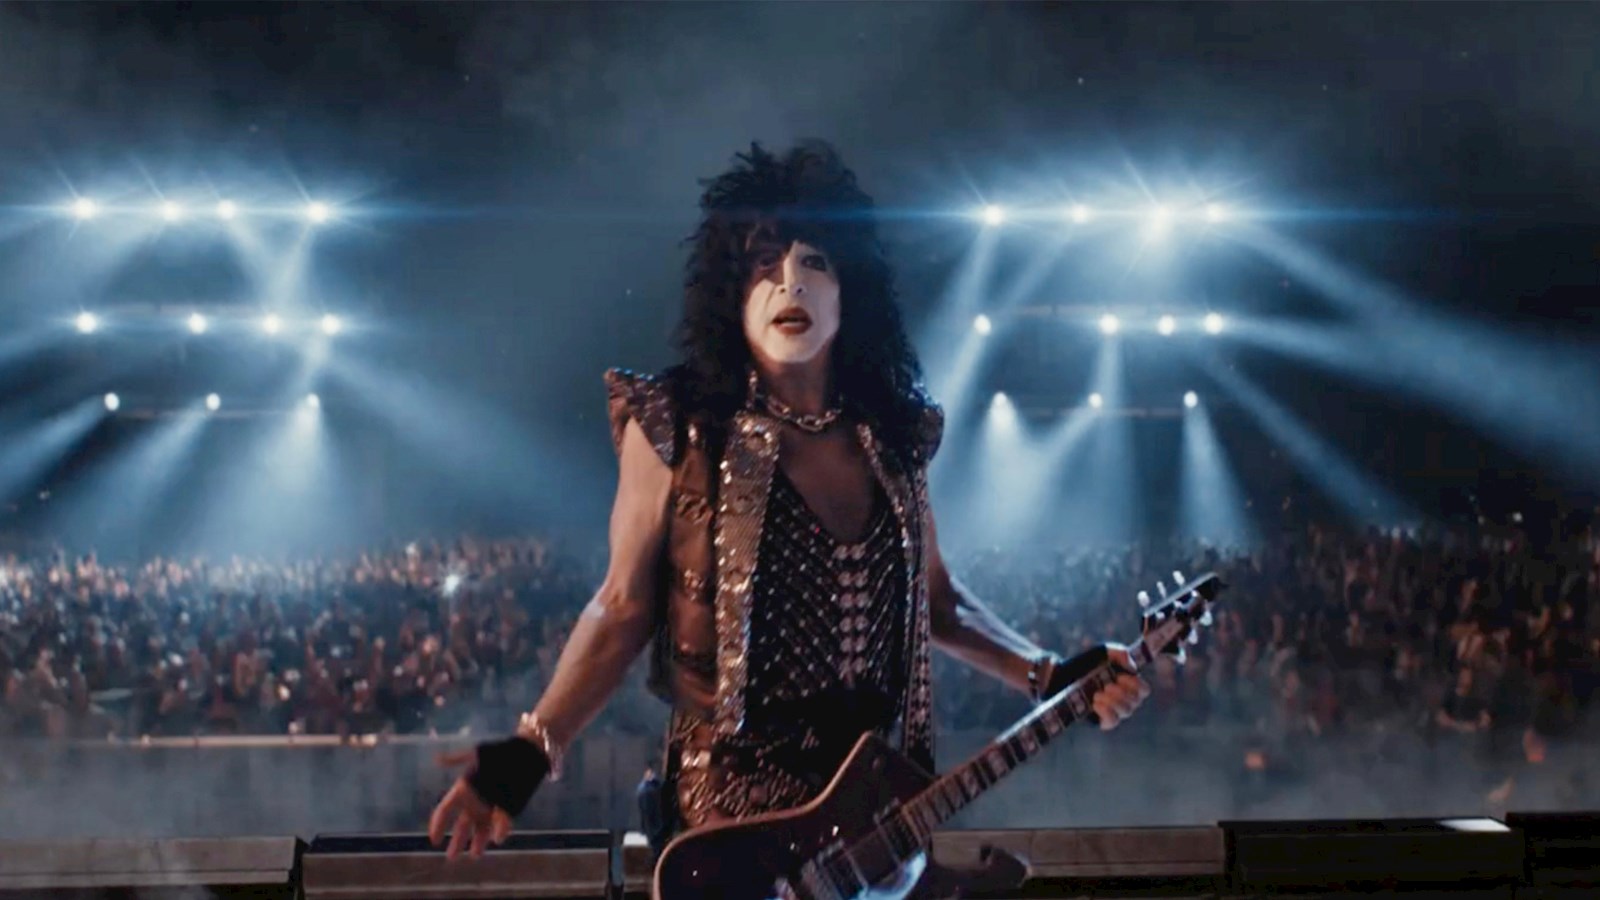 Image from Ogilvy and Workday's Super Bowl Ad - Member of KISS on stage